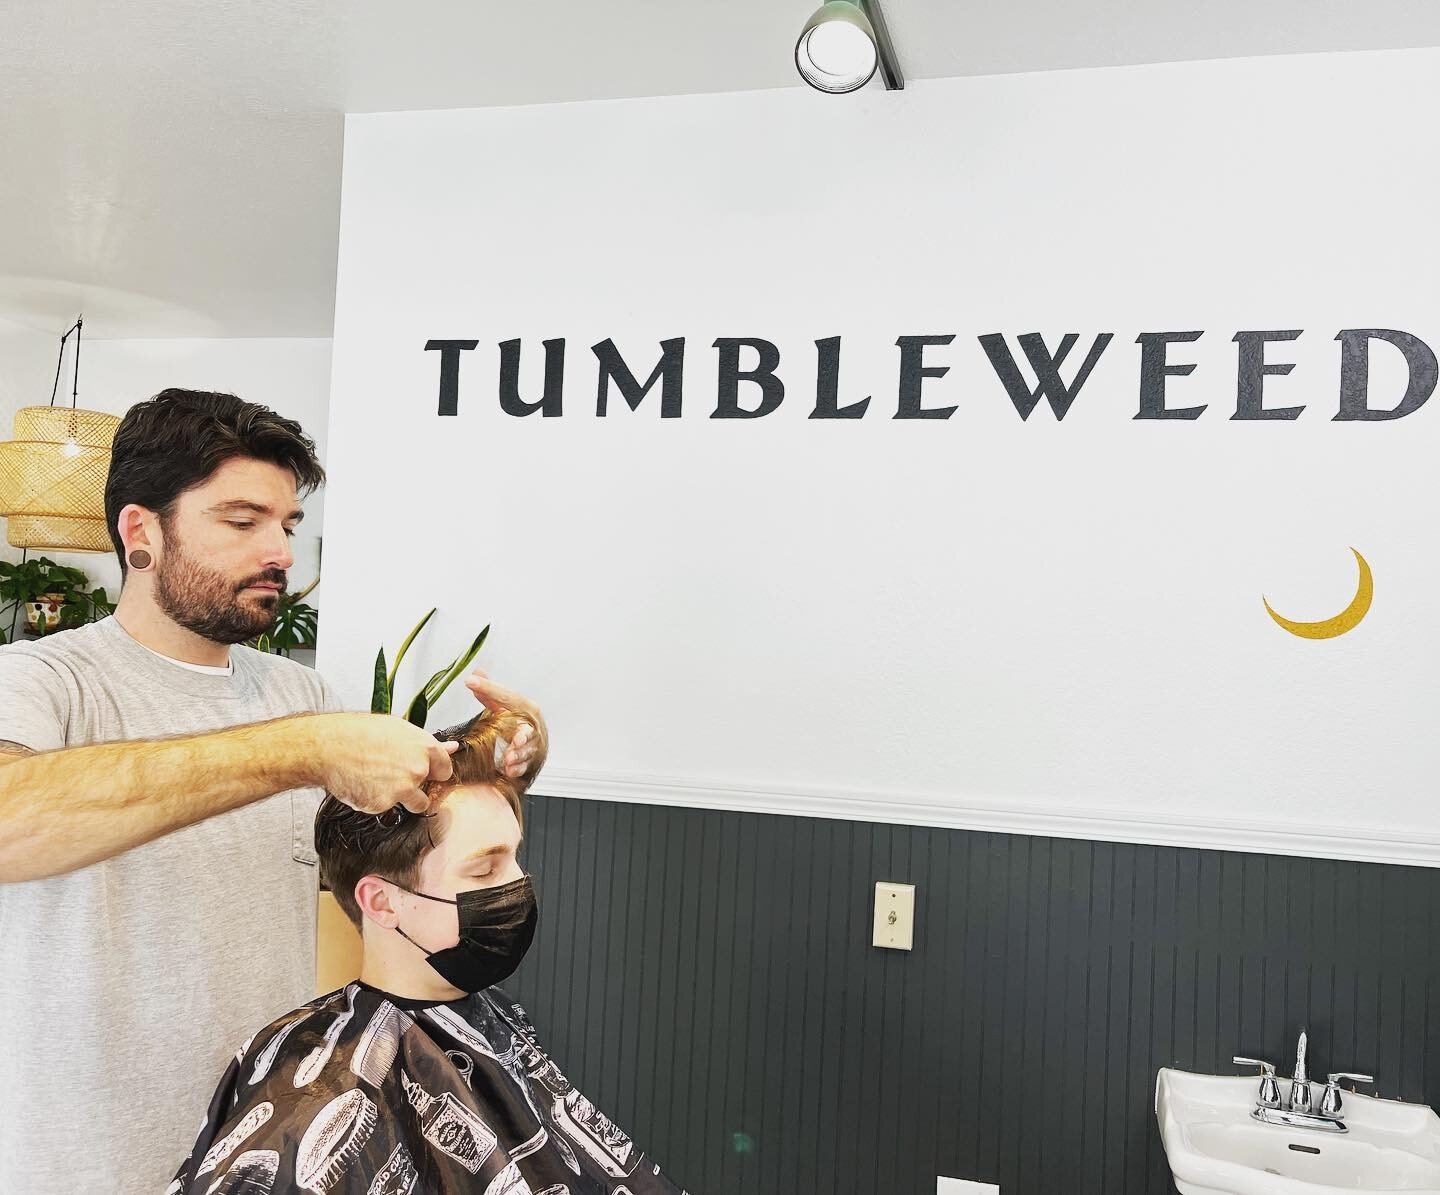 You like Andrew haircuts? He is booking up fast these days. If you would like to get cut by him he is currently booked out until mid September. Keep this in mind and pre-book to get your preferred time in and not get a case of the bummers.

#tumblewe